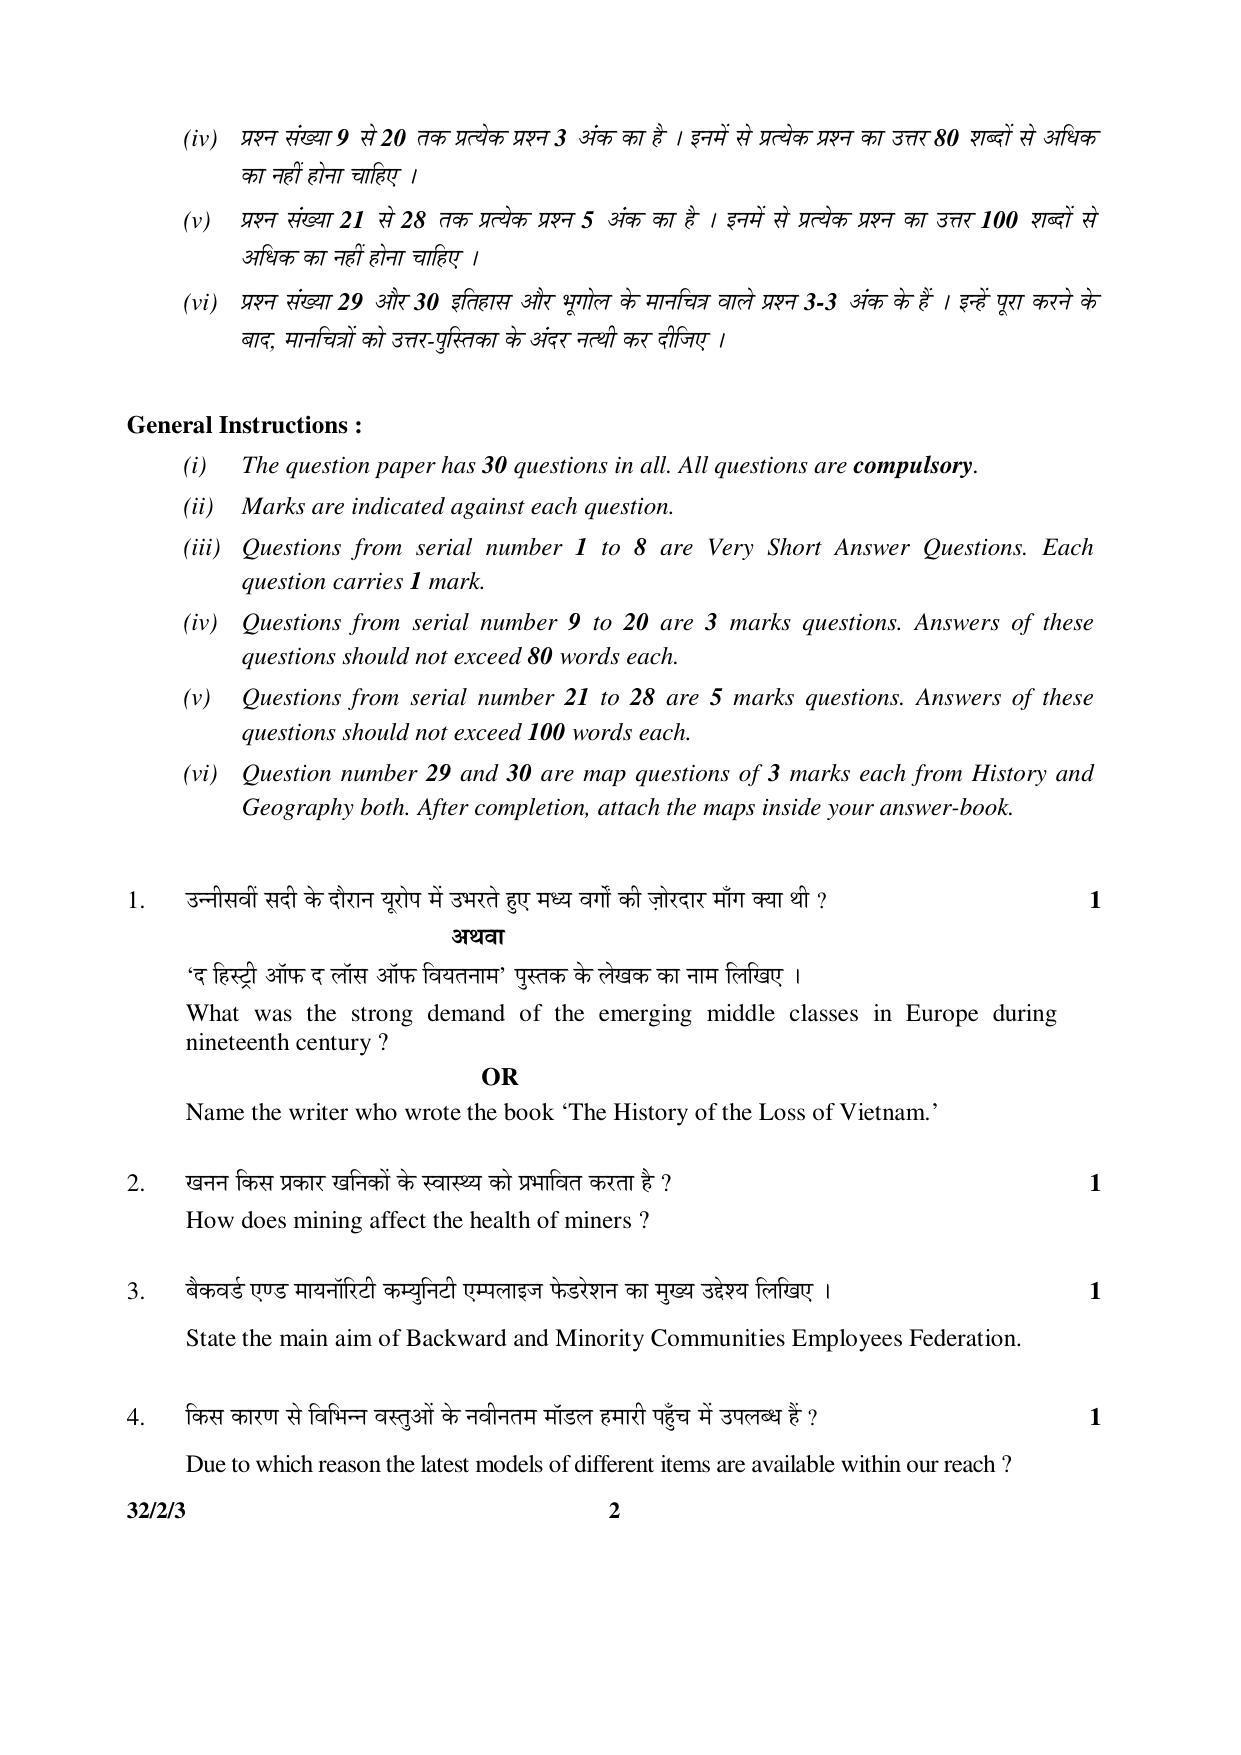 CBSE Class 10 32-2-3 _Social Science 2016 Question Paper - Page 2